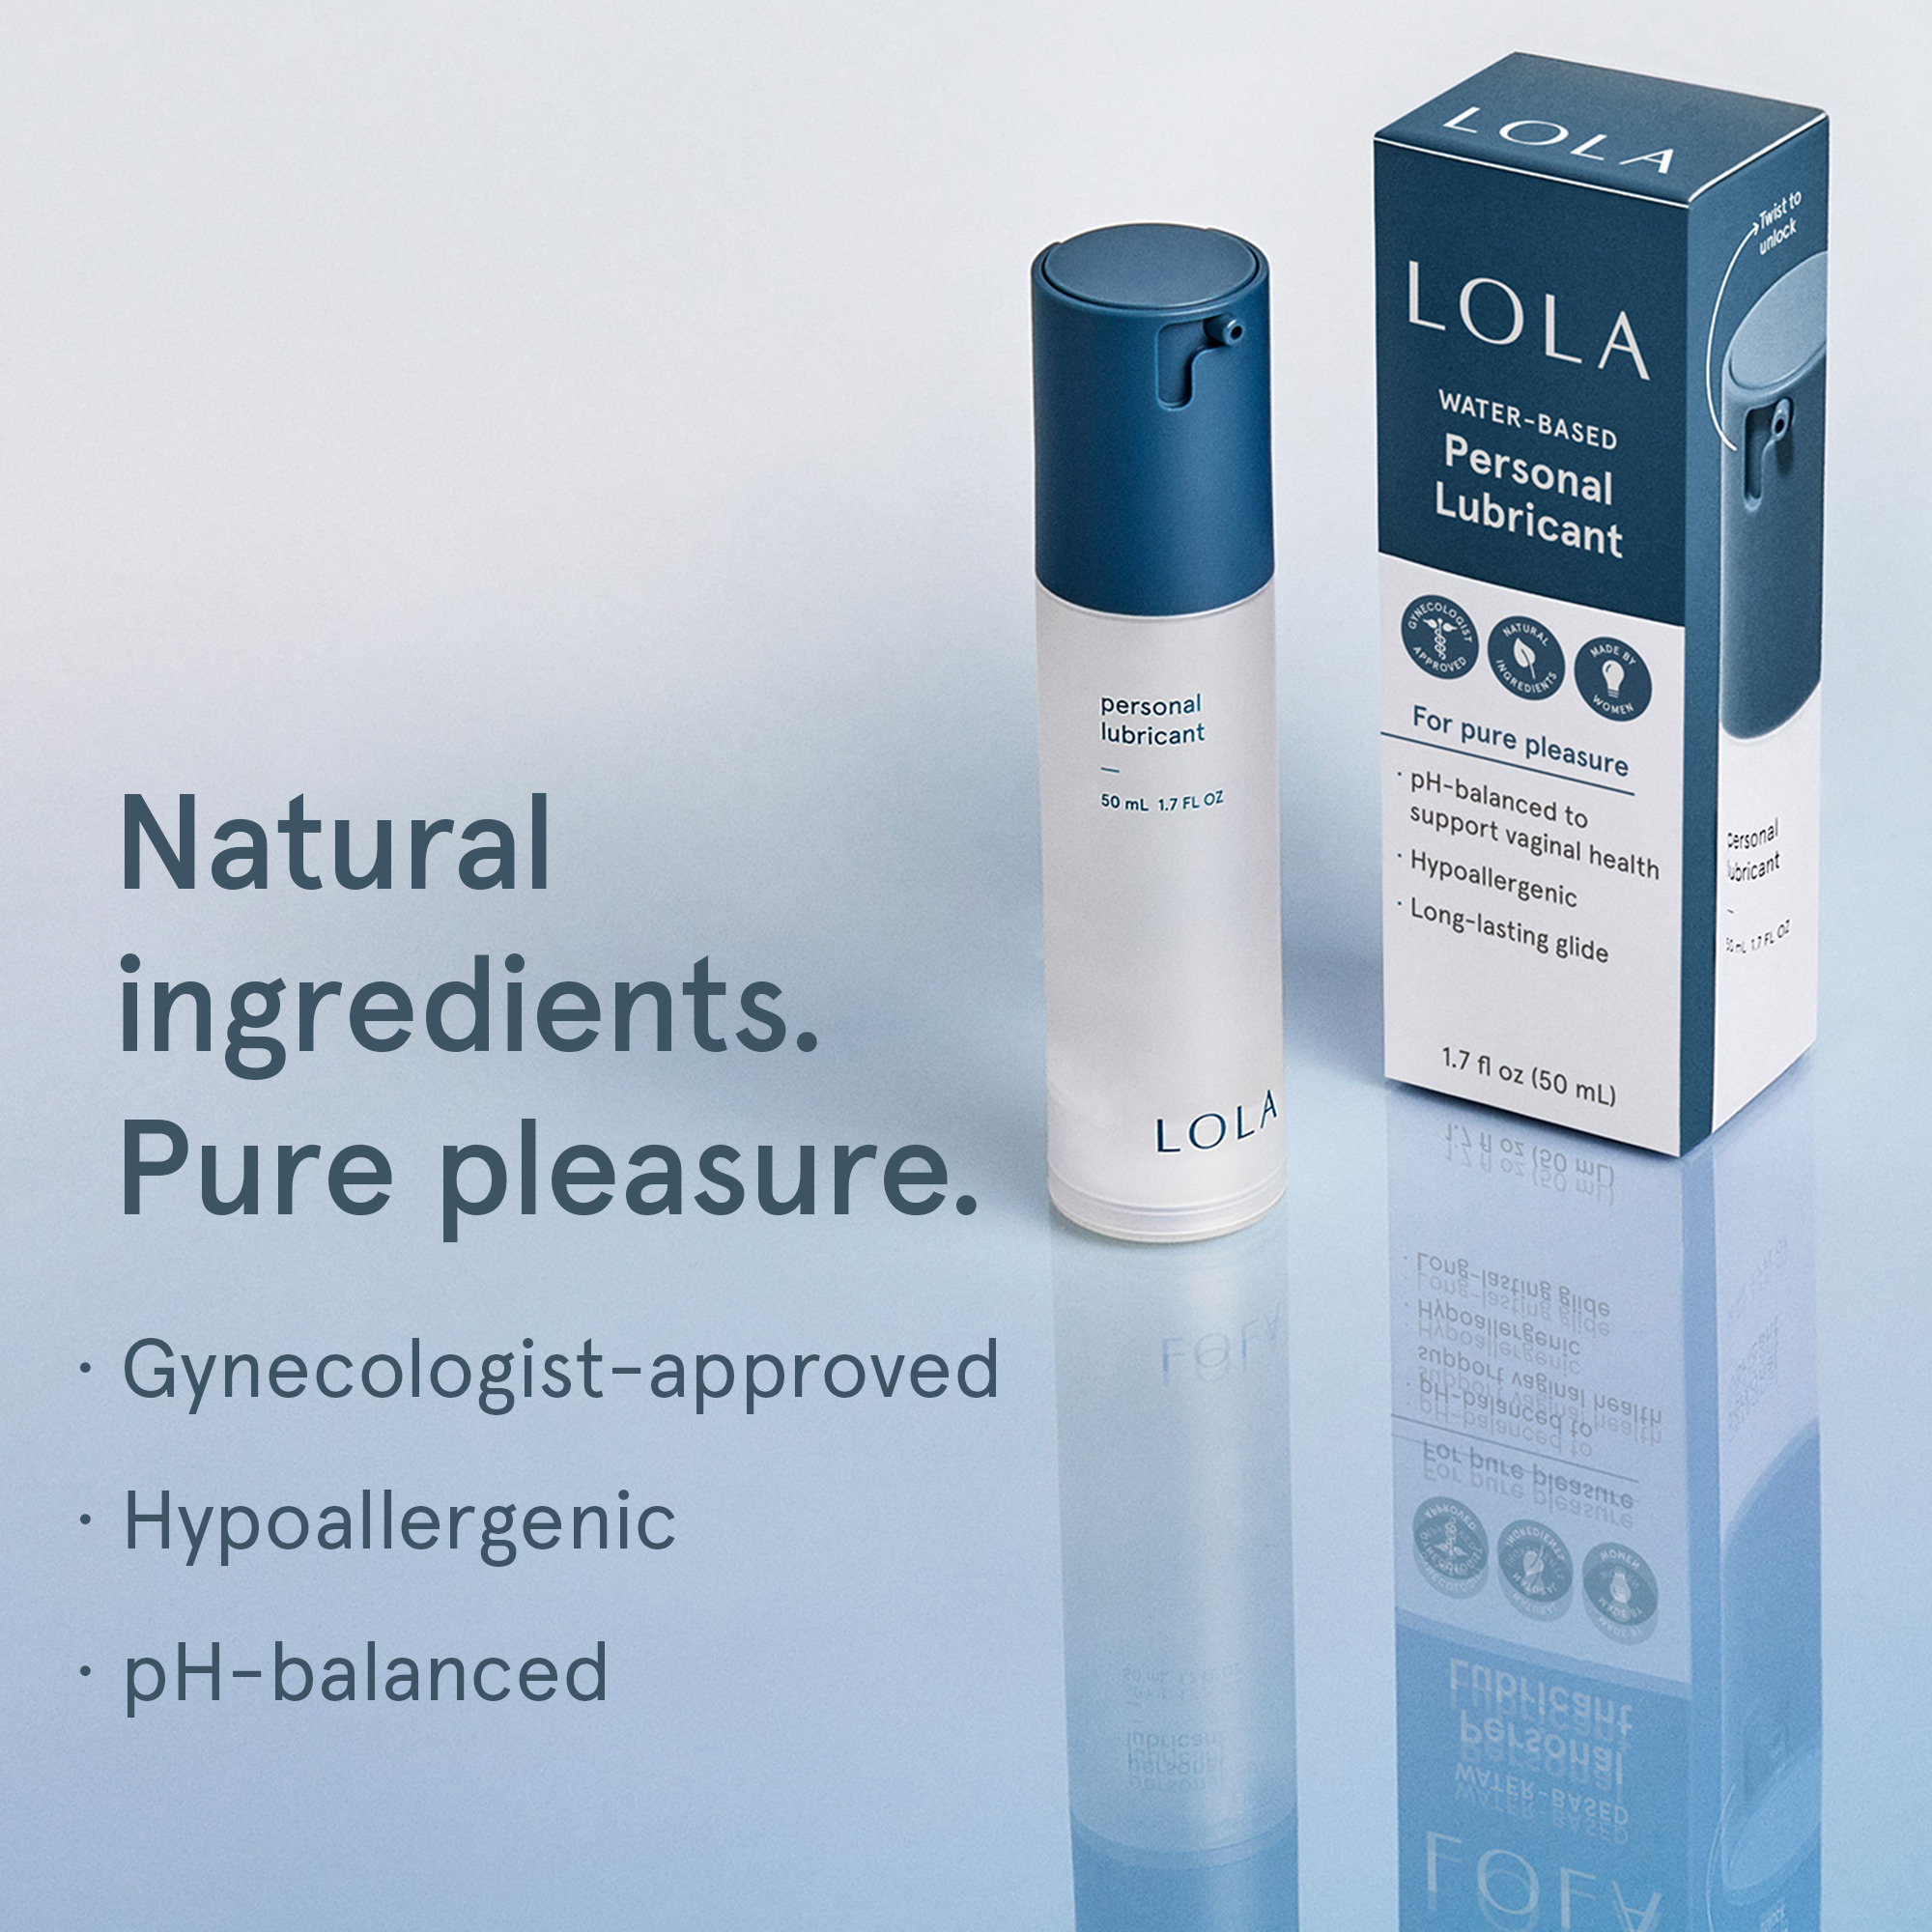 LOLA Personal Lubricant, Water-Based Lube for Sexual Wellness, 1.7 fl. oz - image 5 of 9